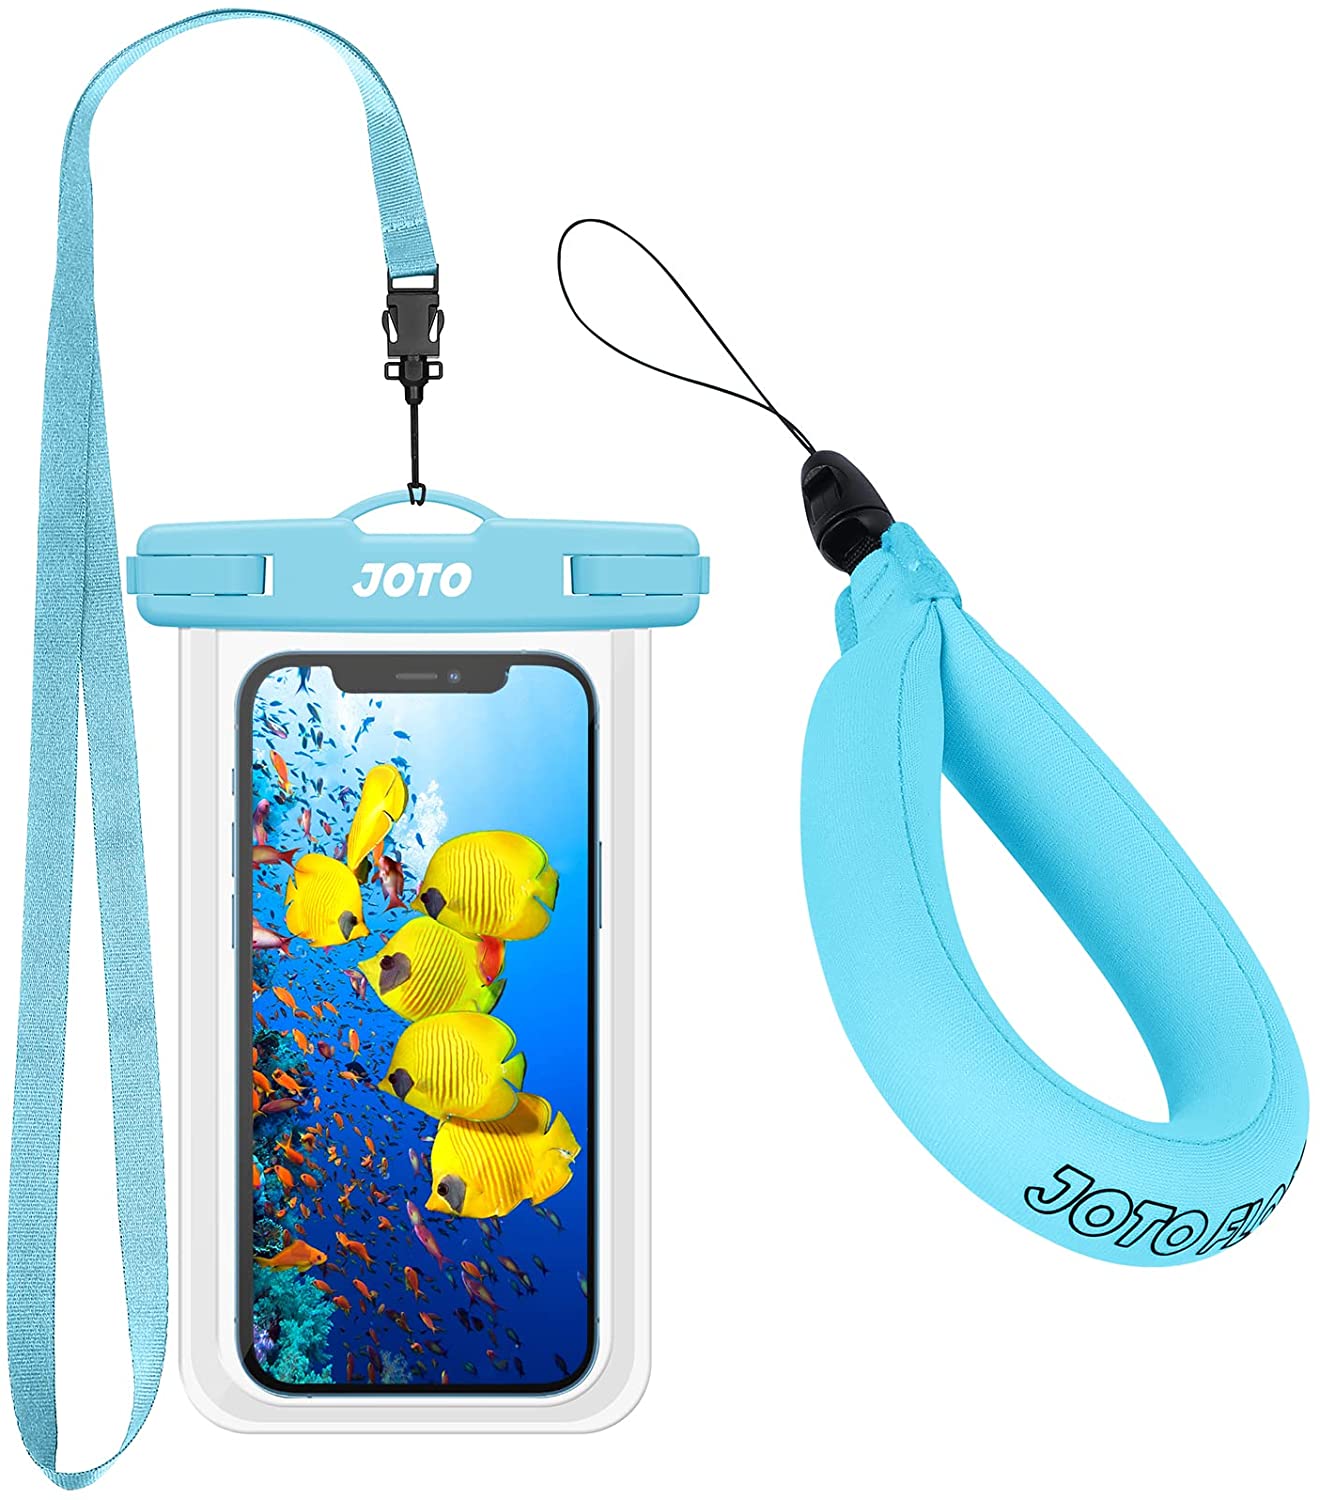 JOTO's waterproof case ensures nothing gets in yet still has full touch screen functionality.